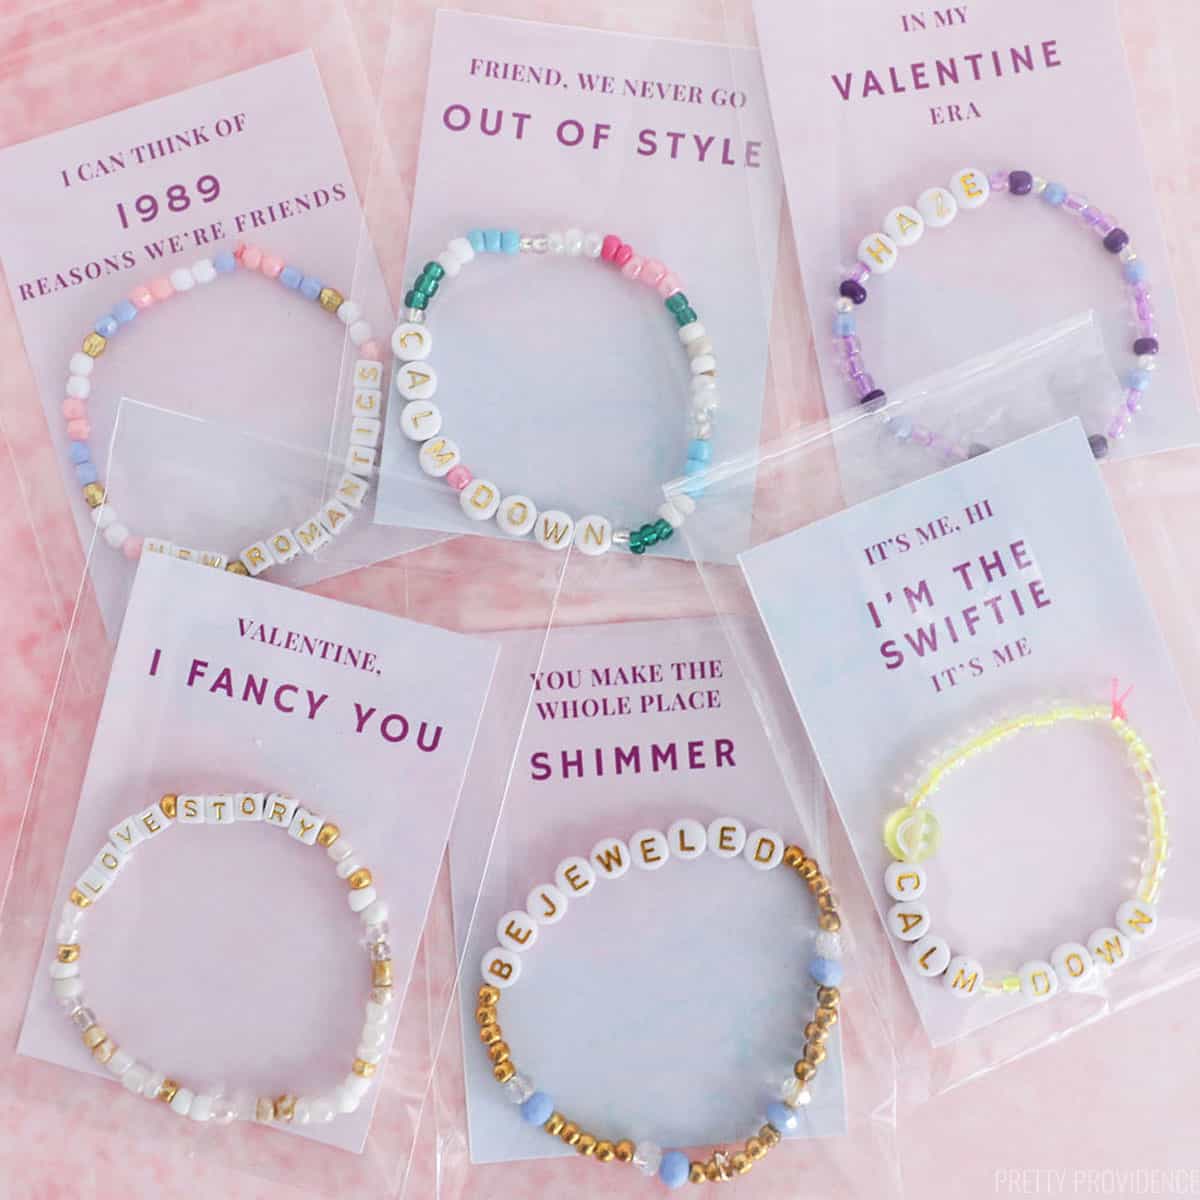 Taylor Swift friendship bracelets in small clear bags with Valentine's cards.